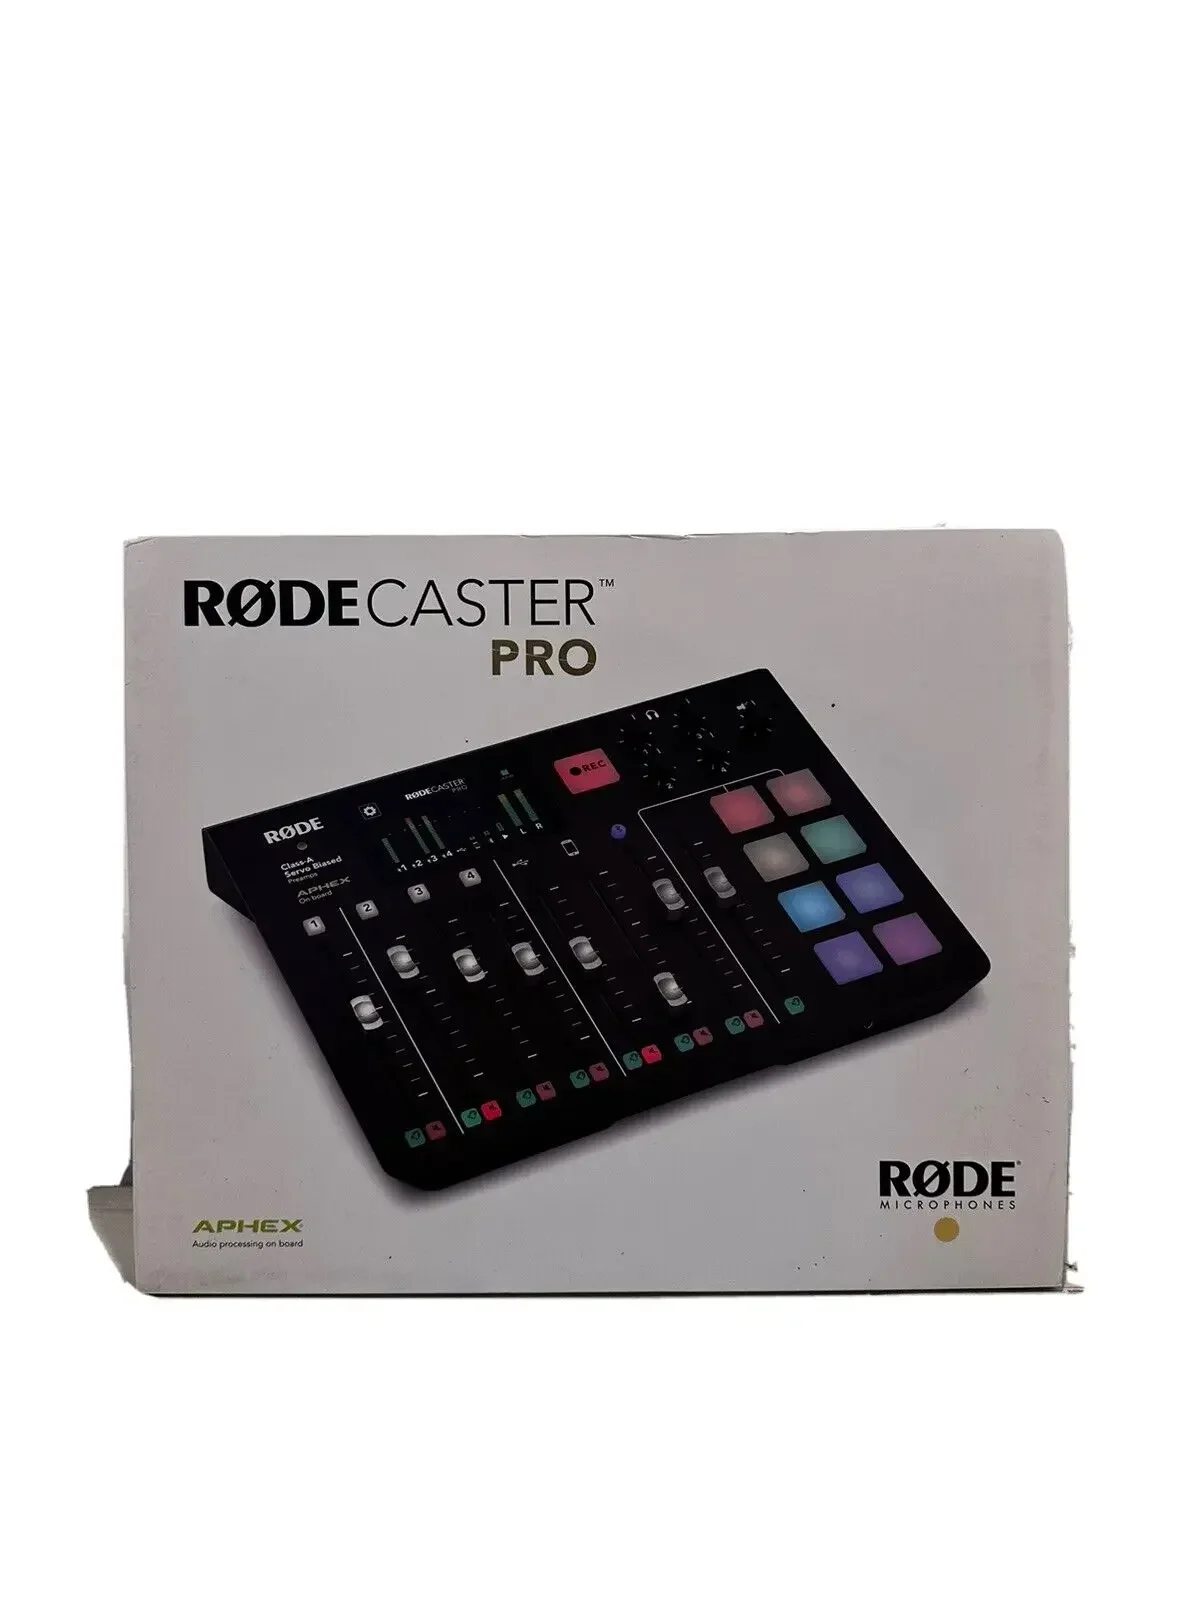 

Summer discount of 50% NEW Rode Microphones RODECaster Pro